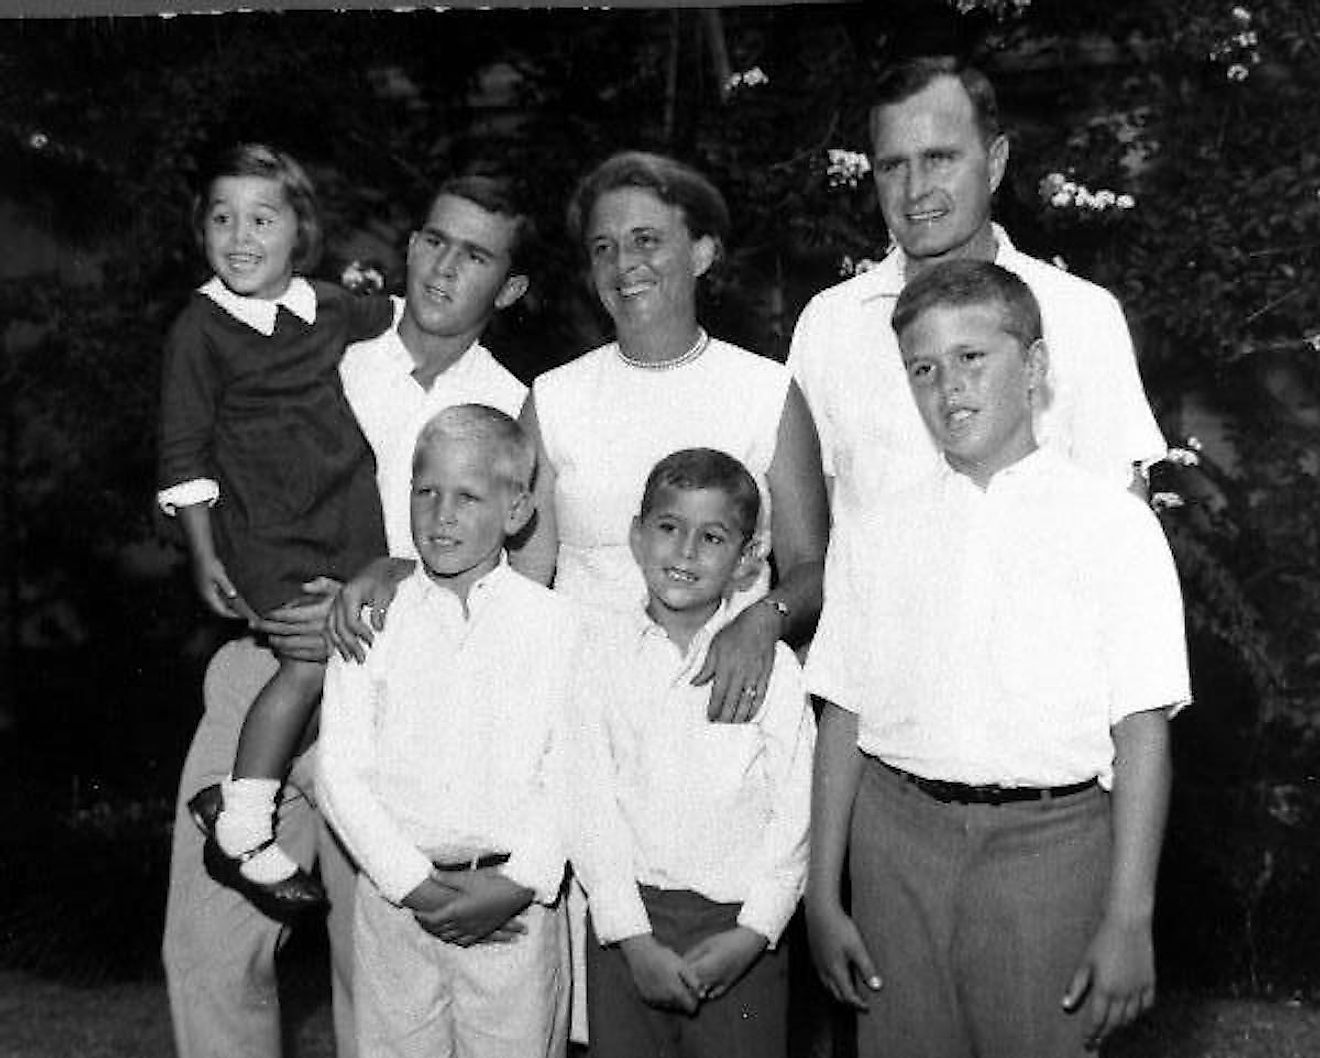 Bush, top right, stood with his wife and children, mid 1960s. Image credit: Quadell/Public domain